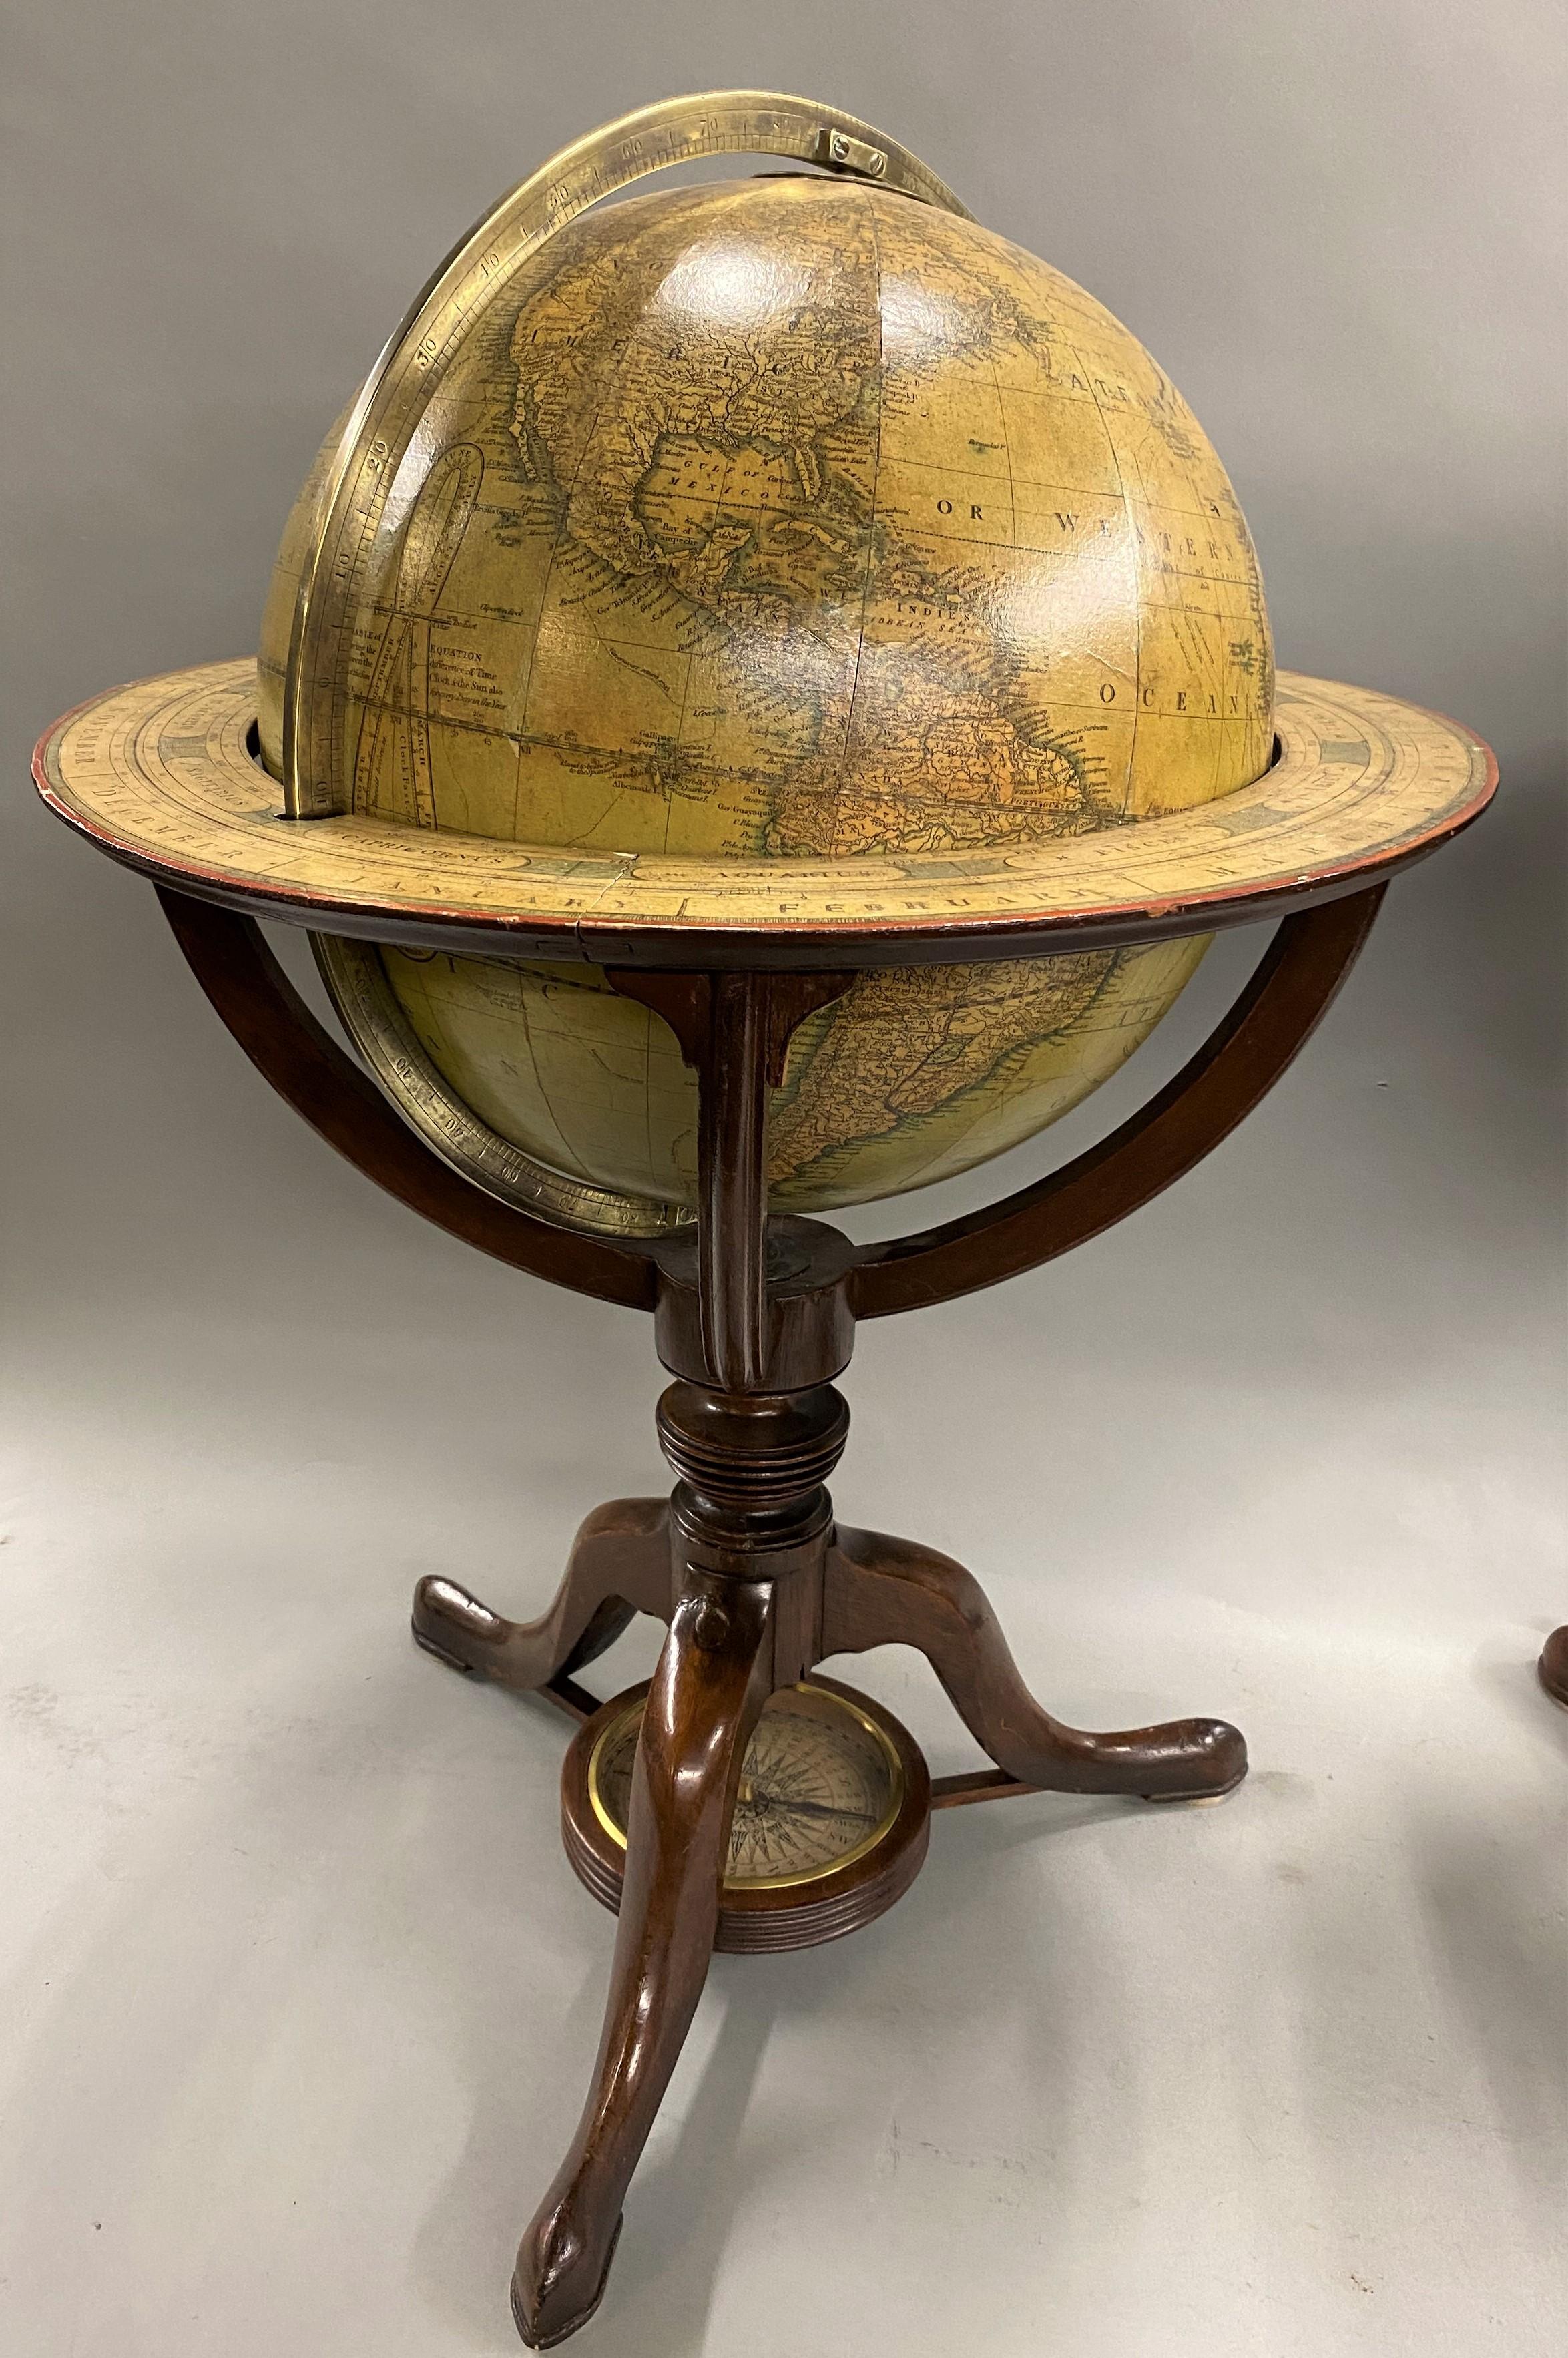 A fine pair of 12-inch English table model globes on stands, manufactured by G.& J. Cary, the left globe with cartouche labeled “Carey’s New Terrestrial Globe, delineated from the best Authorities extant, Exhibiting the late Discoveries towards the